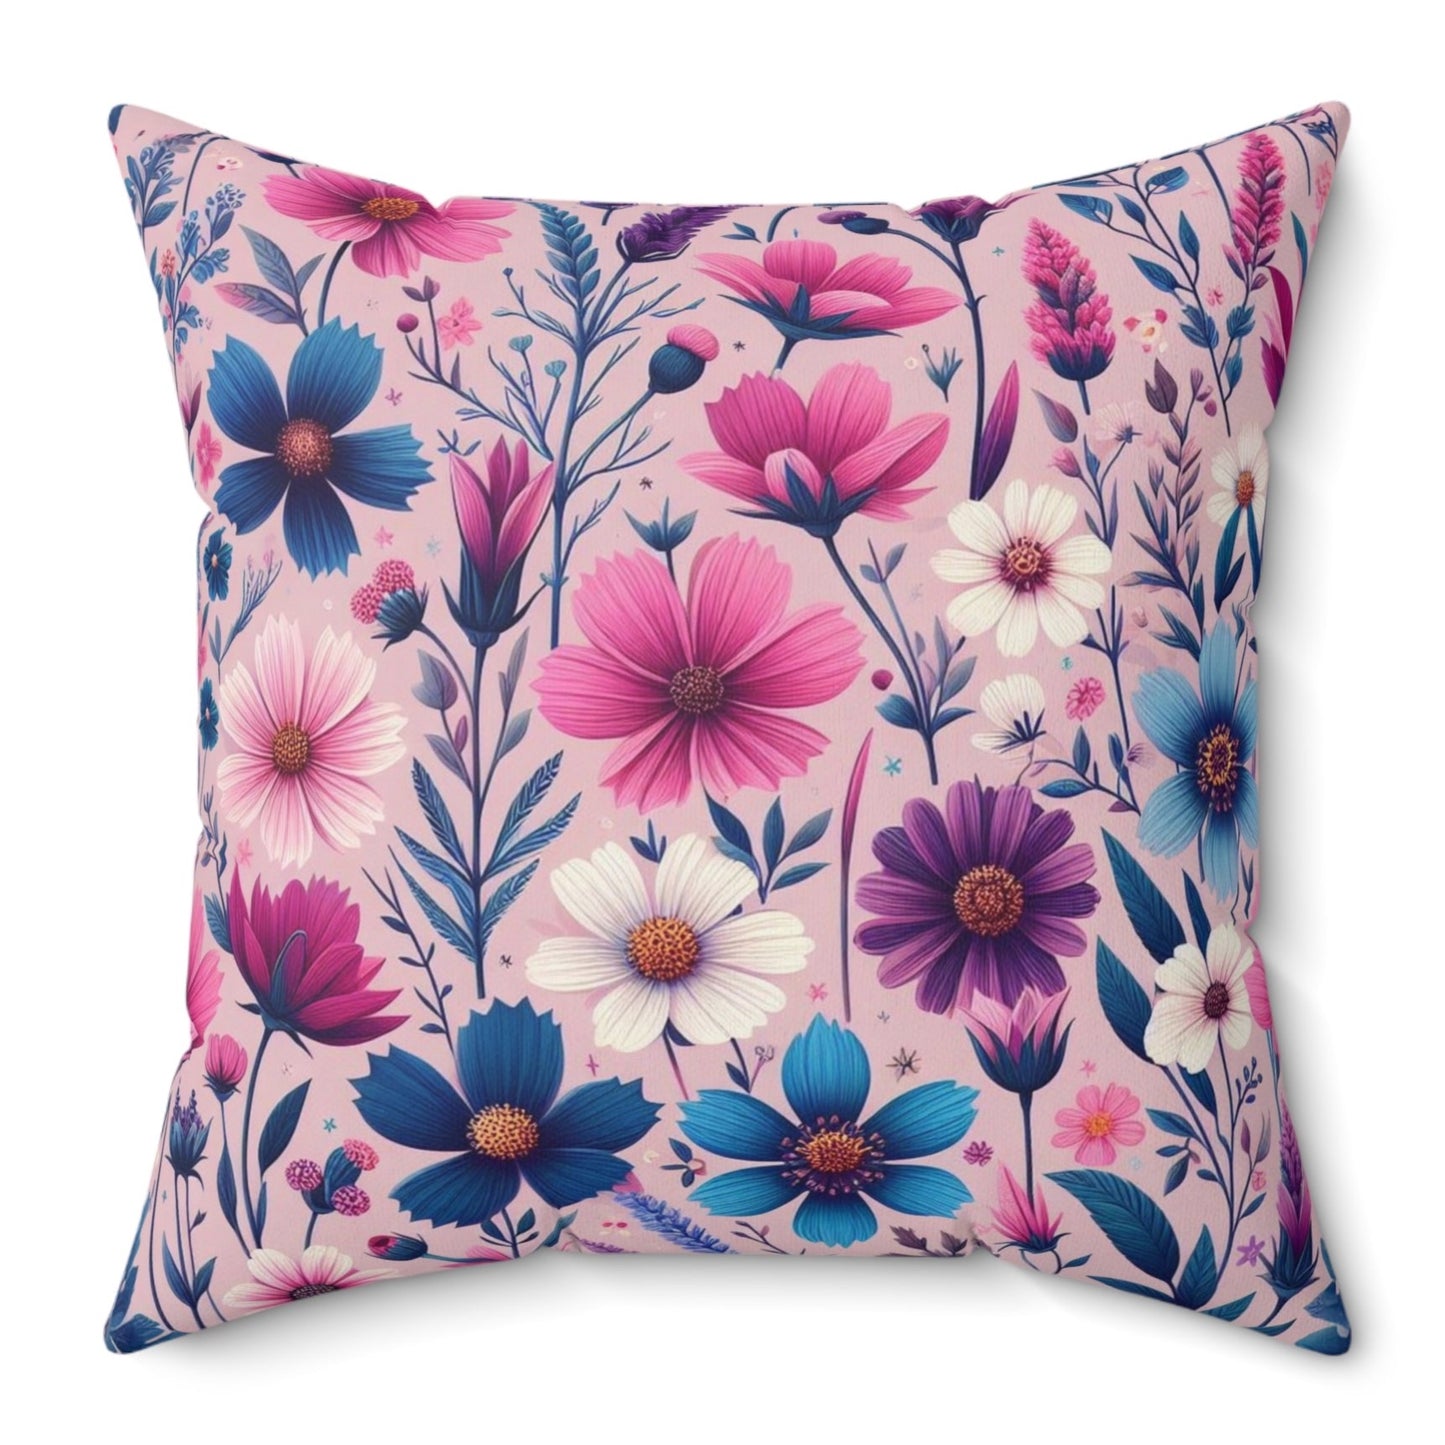 Pink Vintage Floral Throw Pillow Botanical Pink Boho Maximalist Style Polyester Cushion Square Cover